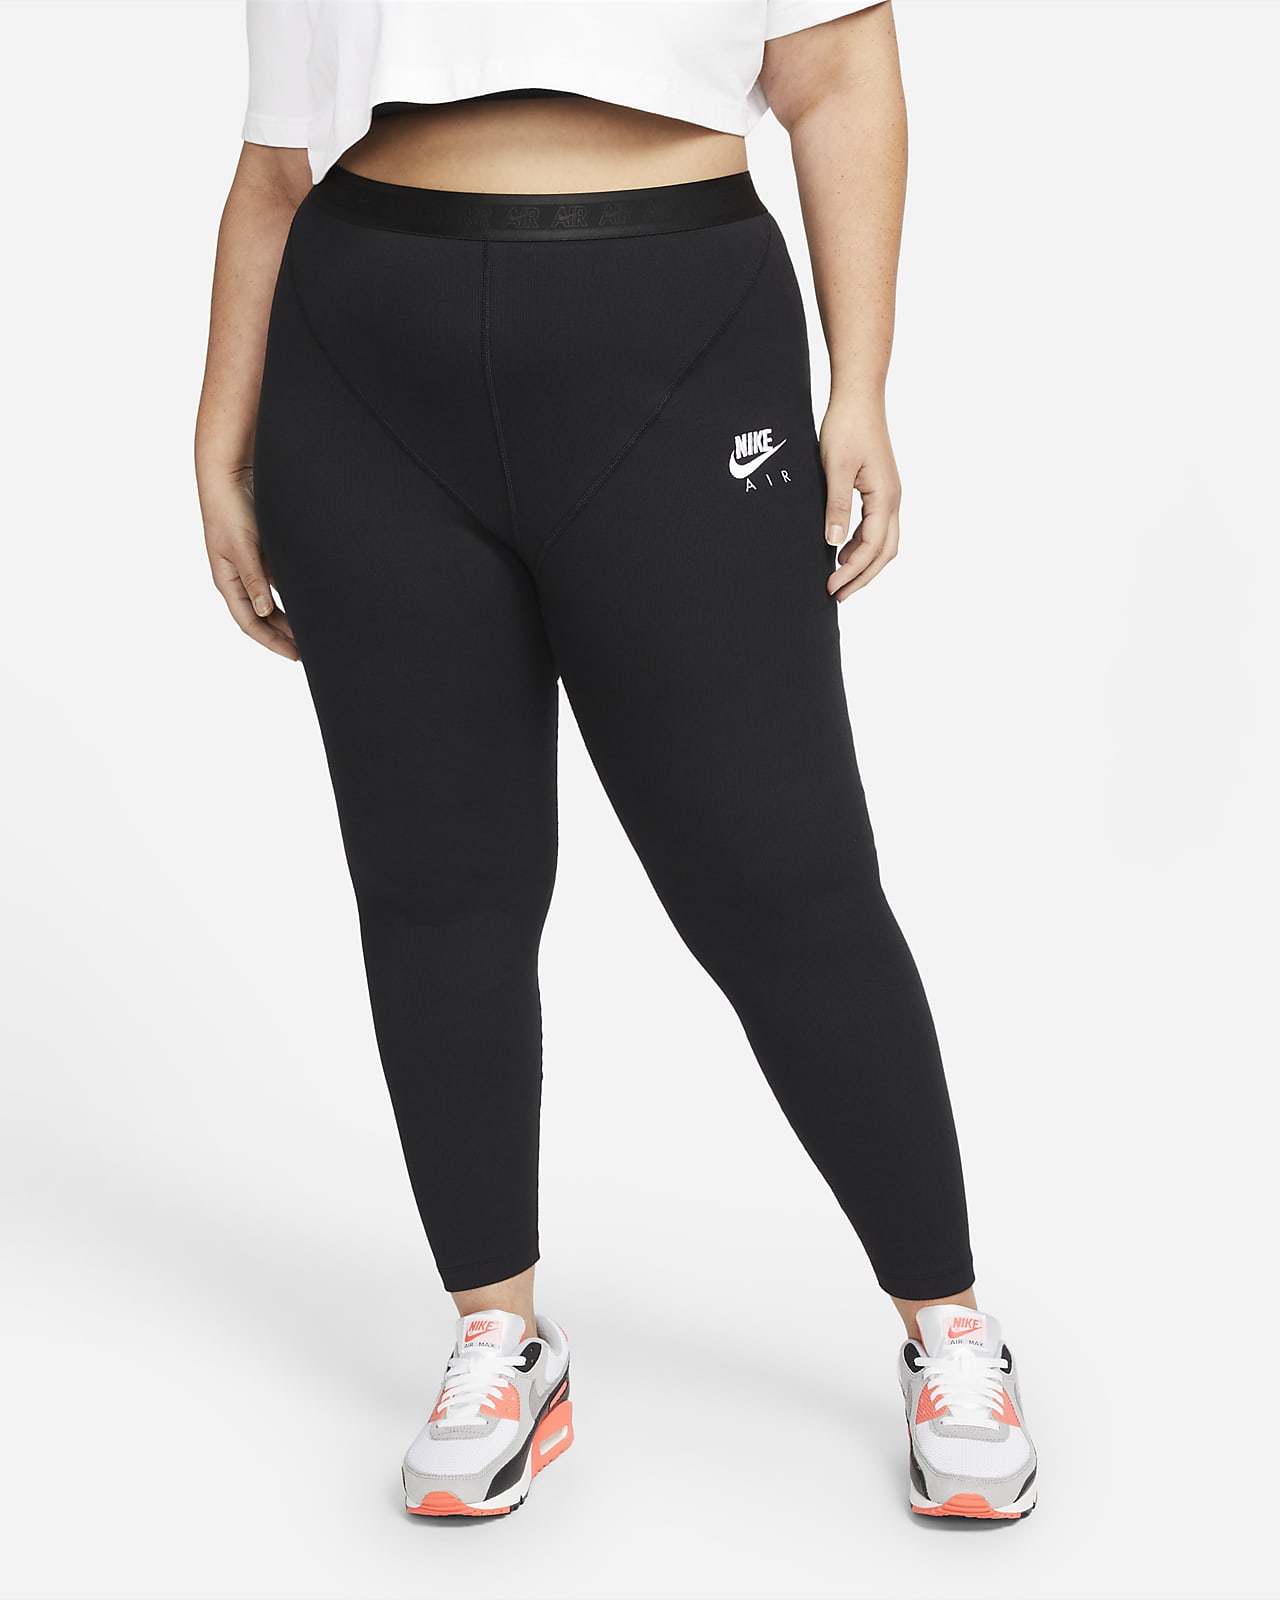 ambición Aniquilar Excremento Nike Air Women's High-Waisted Ribbed Leggings (Plus Size). Nike GB